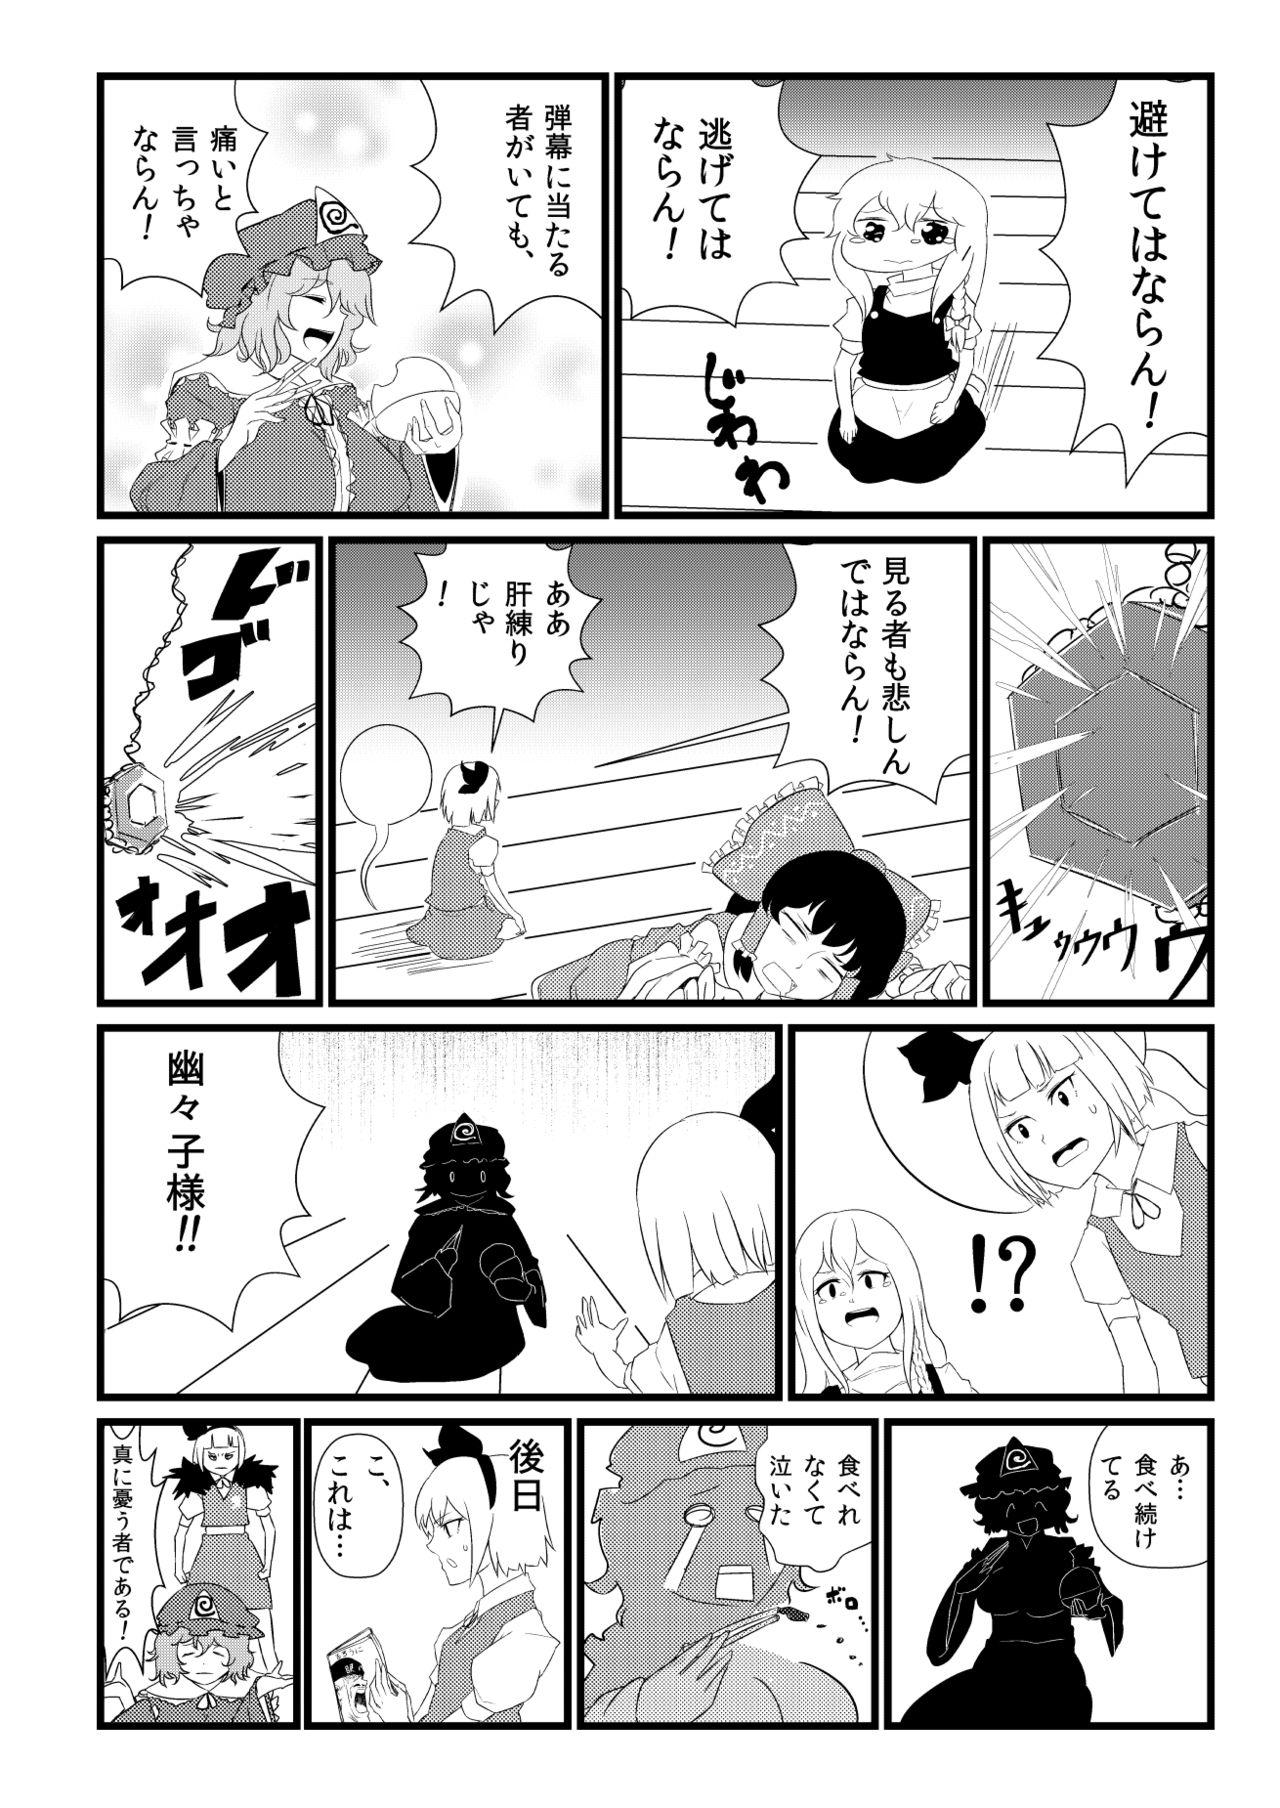 Lesbian 東方板としあき合同誌5 - Touhou project Leche - Page 4